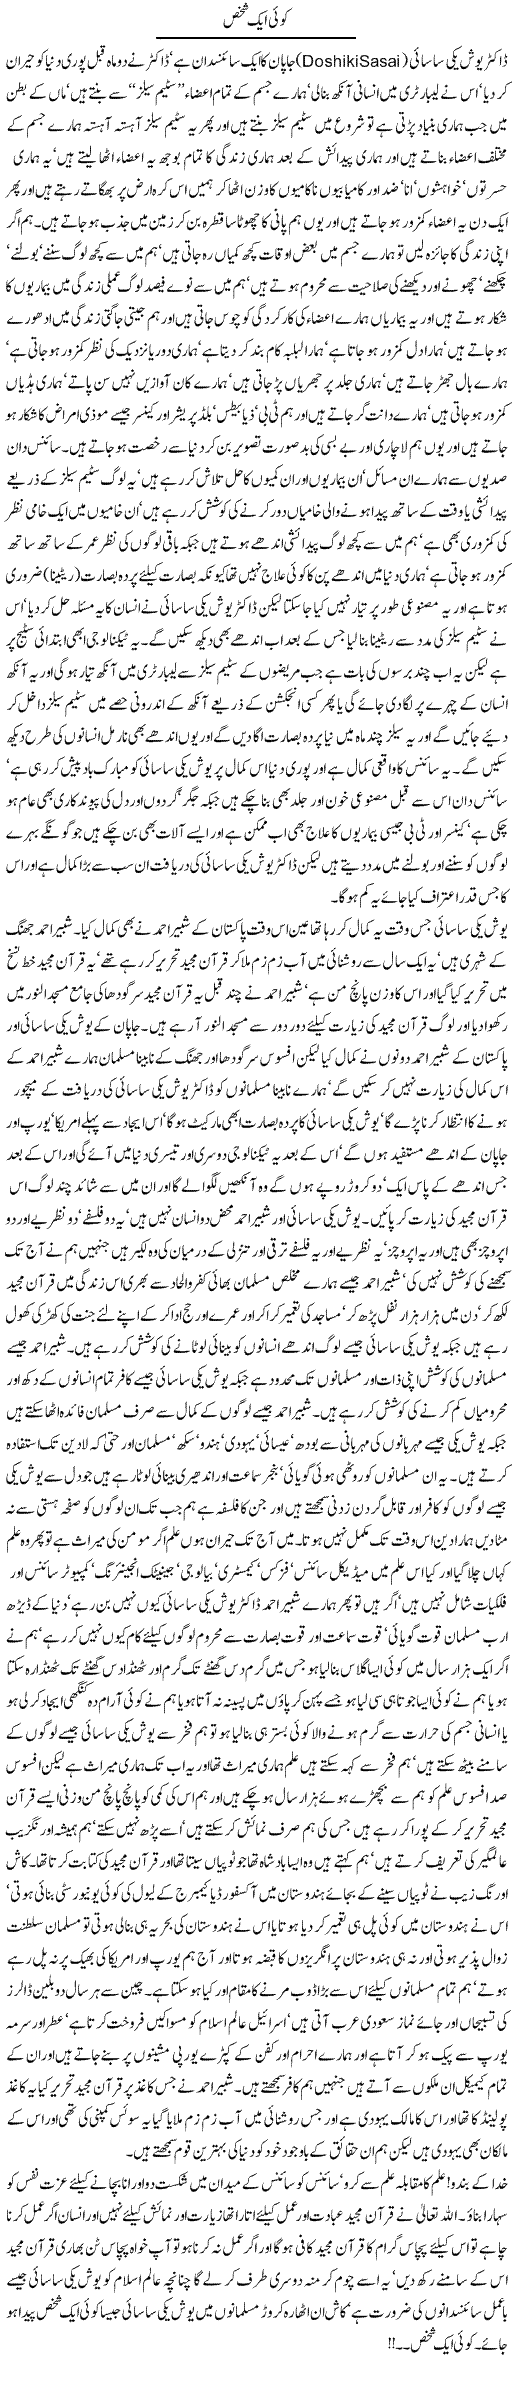 Muslims Needs Education Express Column Javed Chaudhry 10 April 2011